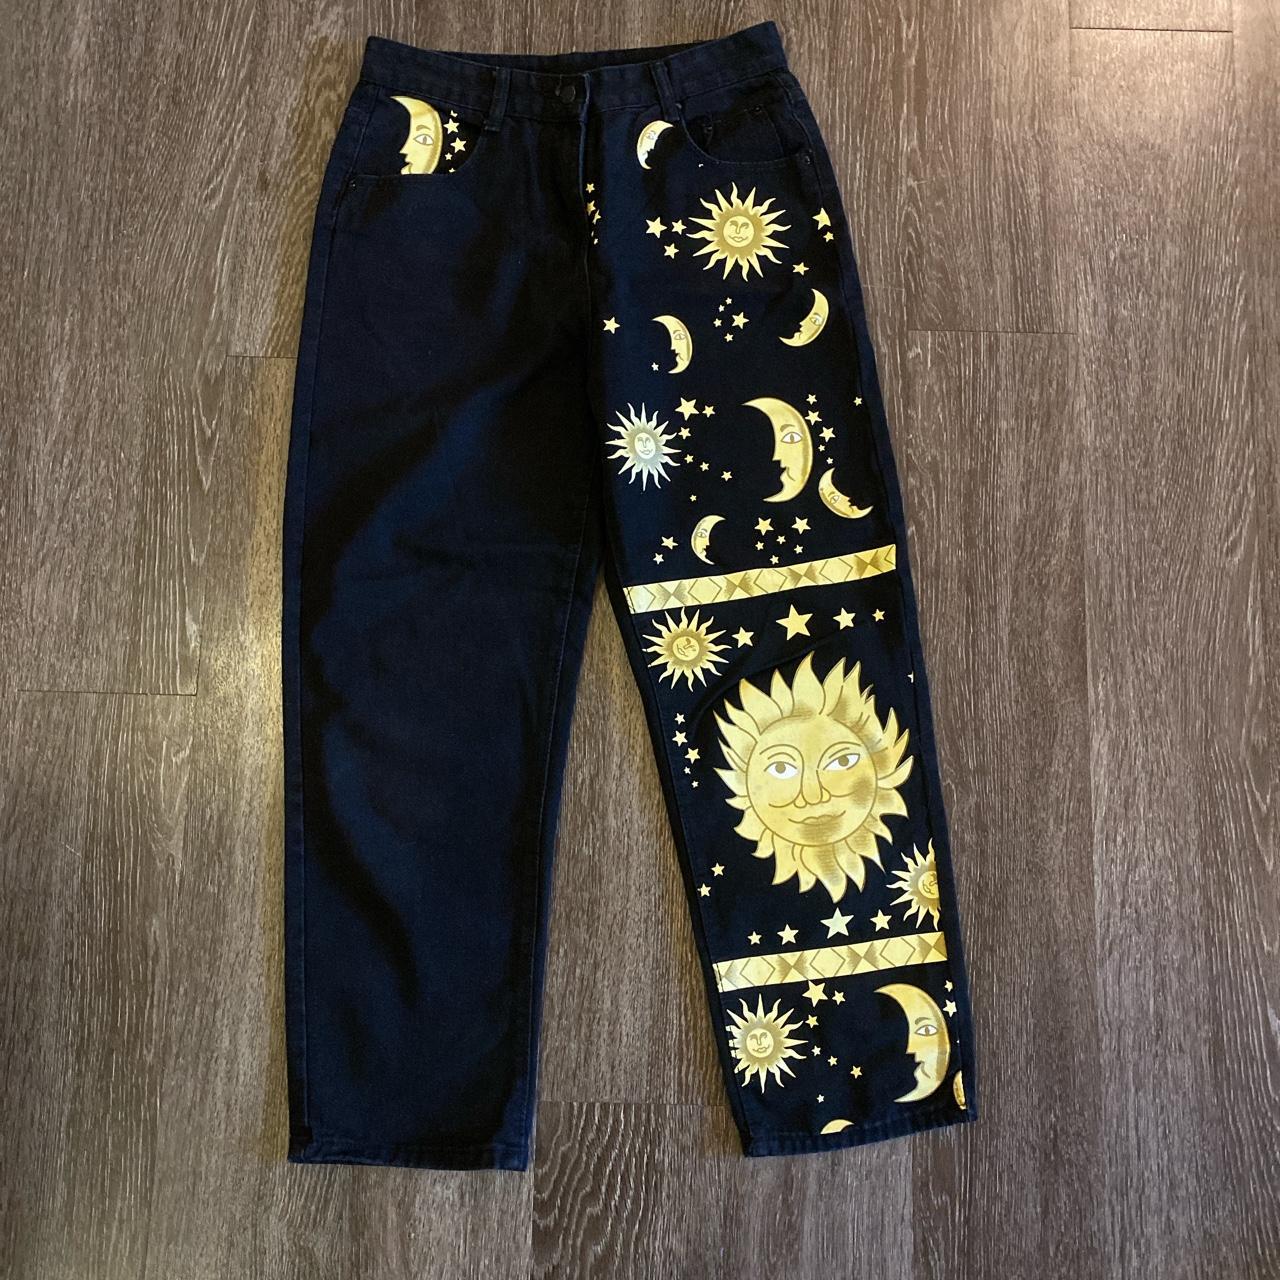 Black jeans with painted sun, moon, and stars - Depop